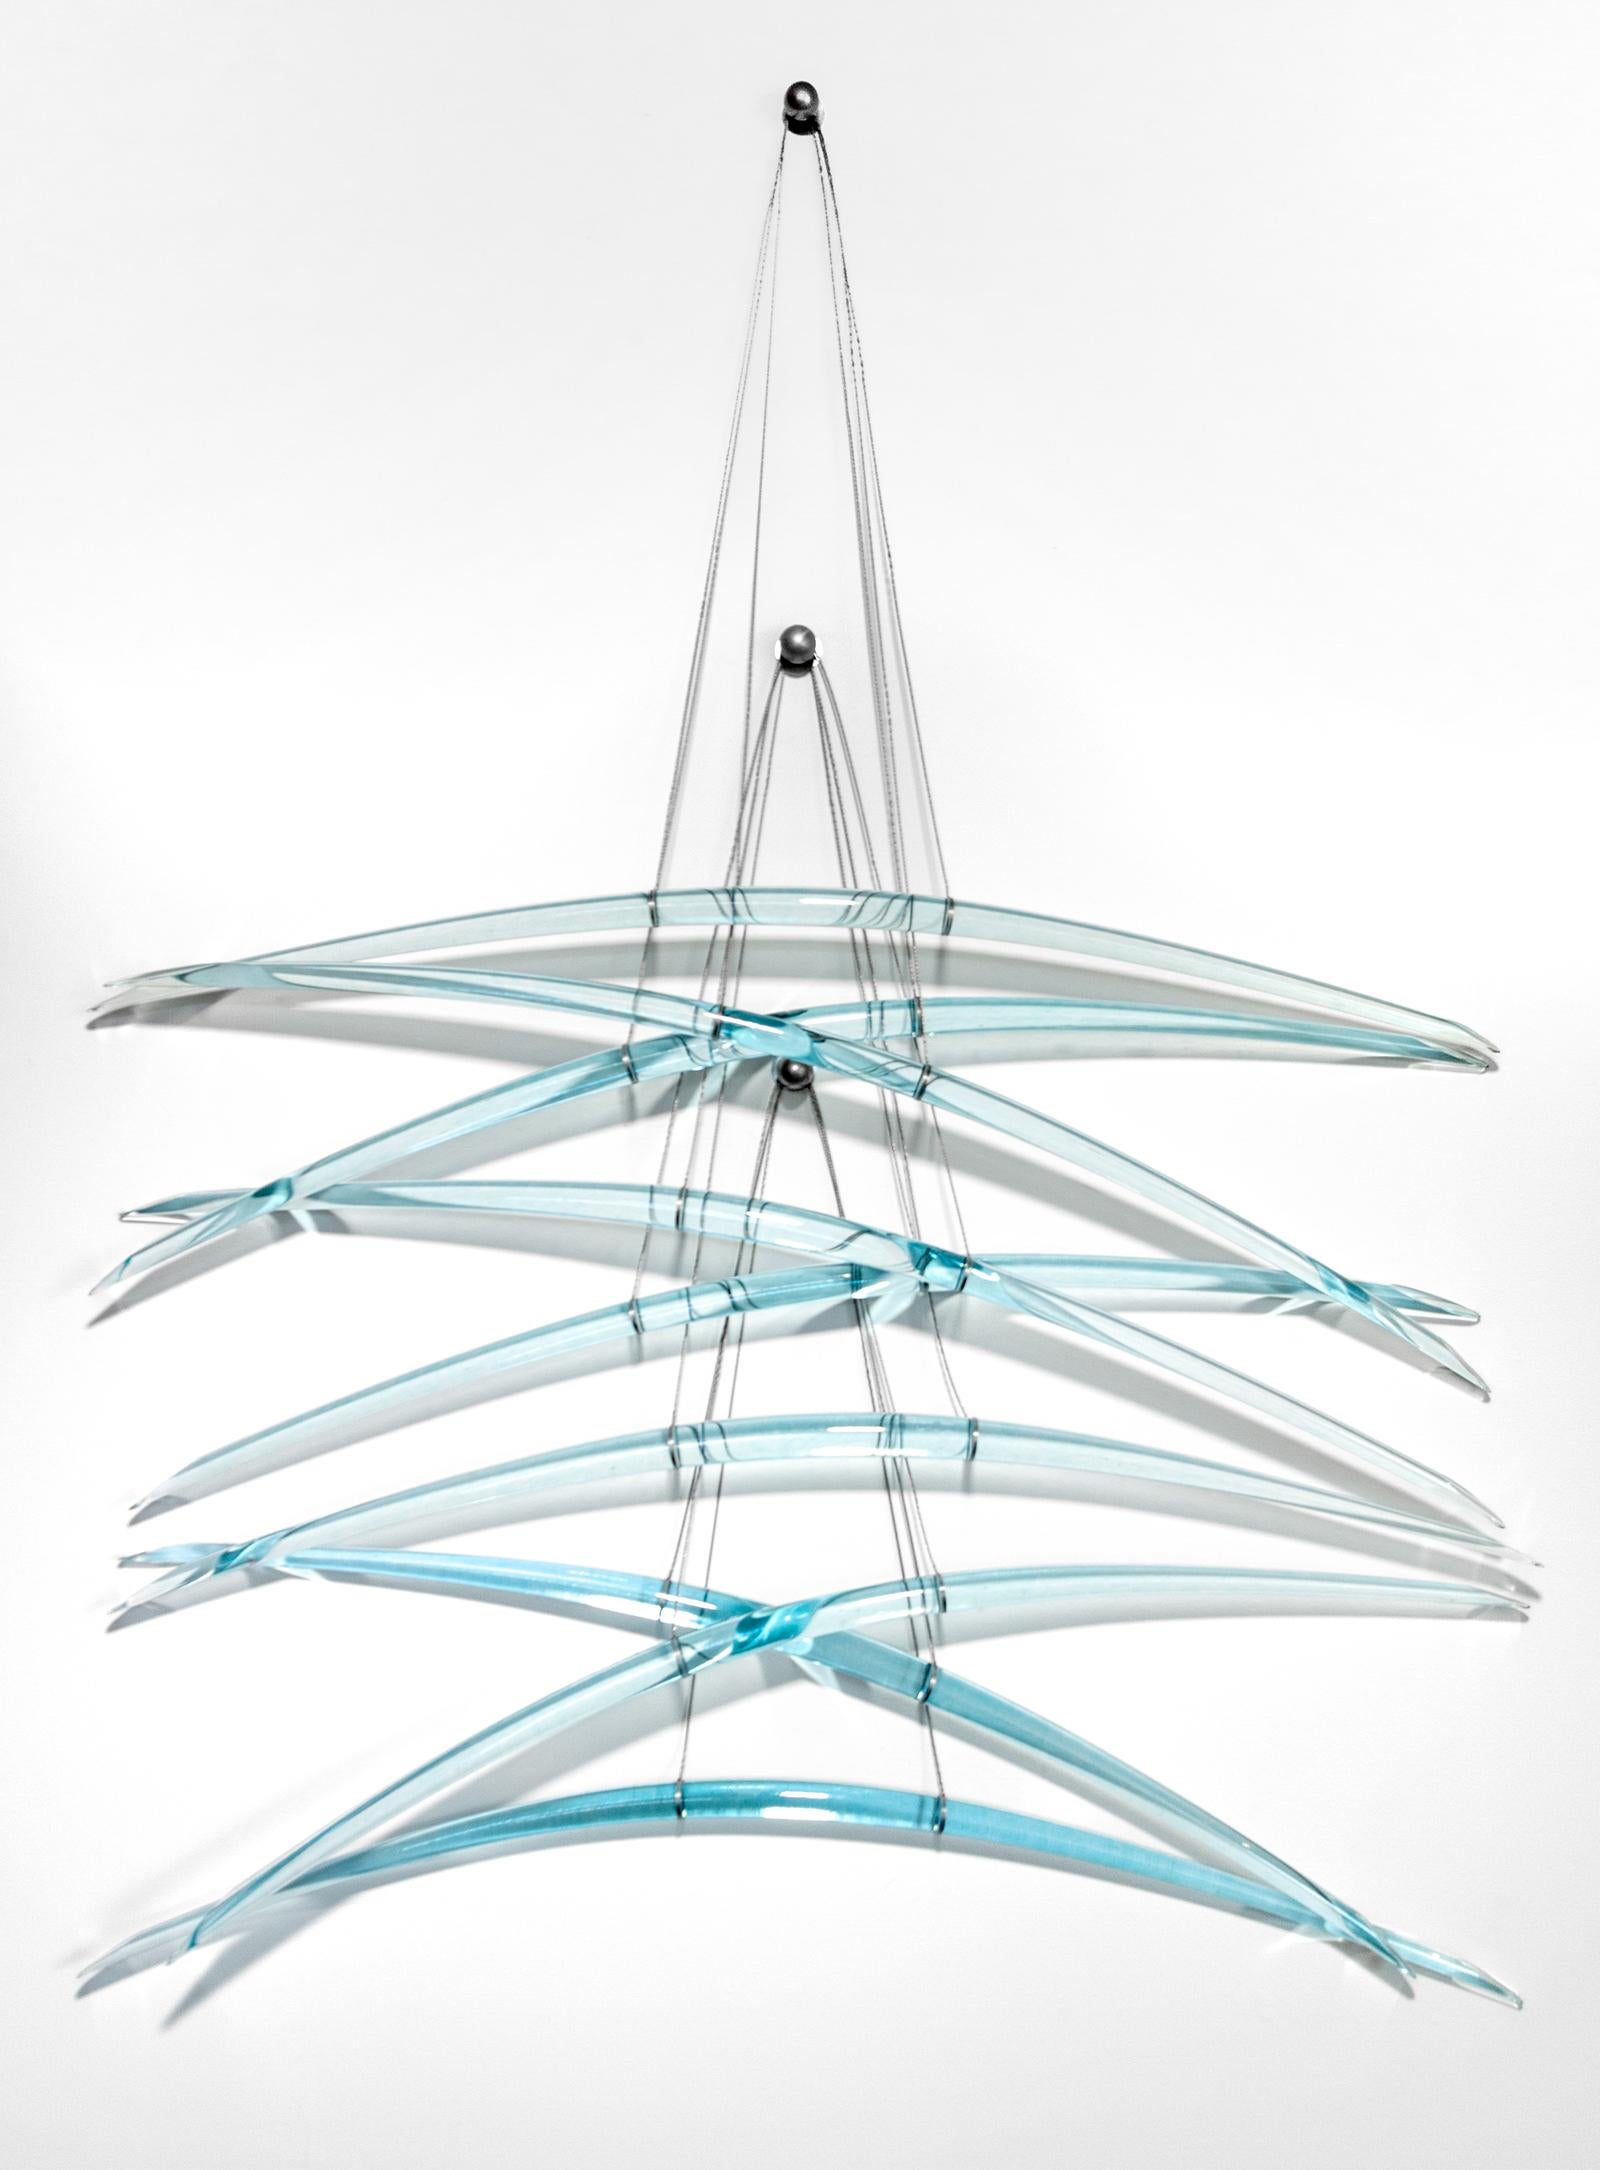 Duality B2 - blue, translucent, abstract, glass, steel, suspended wall sculpture - Sculpture by John Paul Robinson